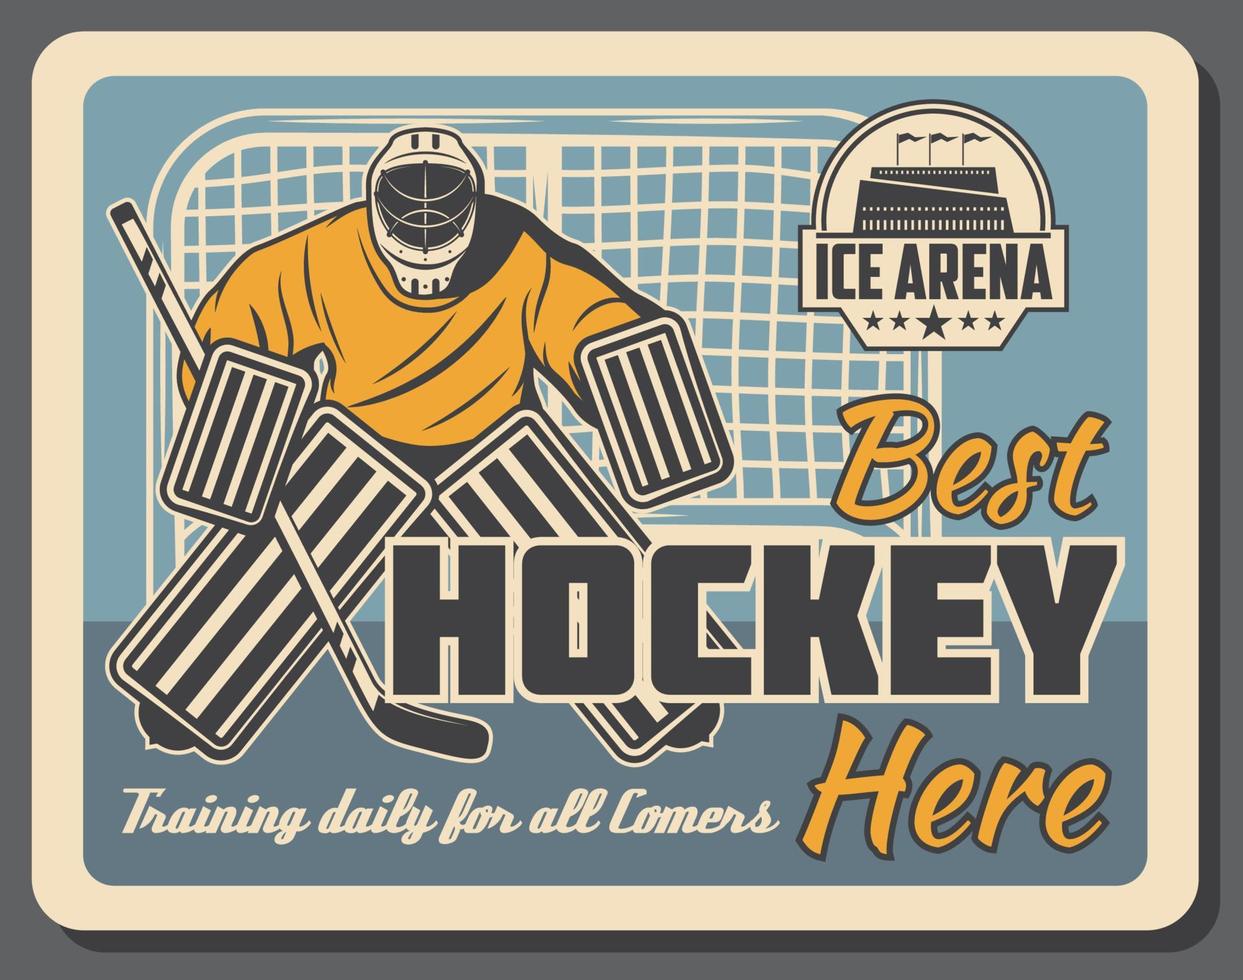 Ice hockey goalkeeper in gates on rink arena vector